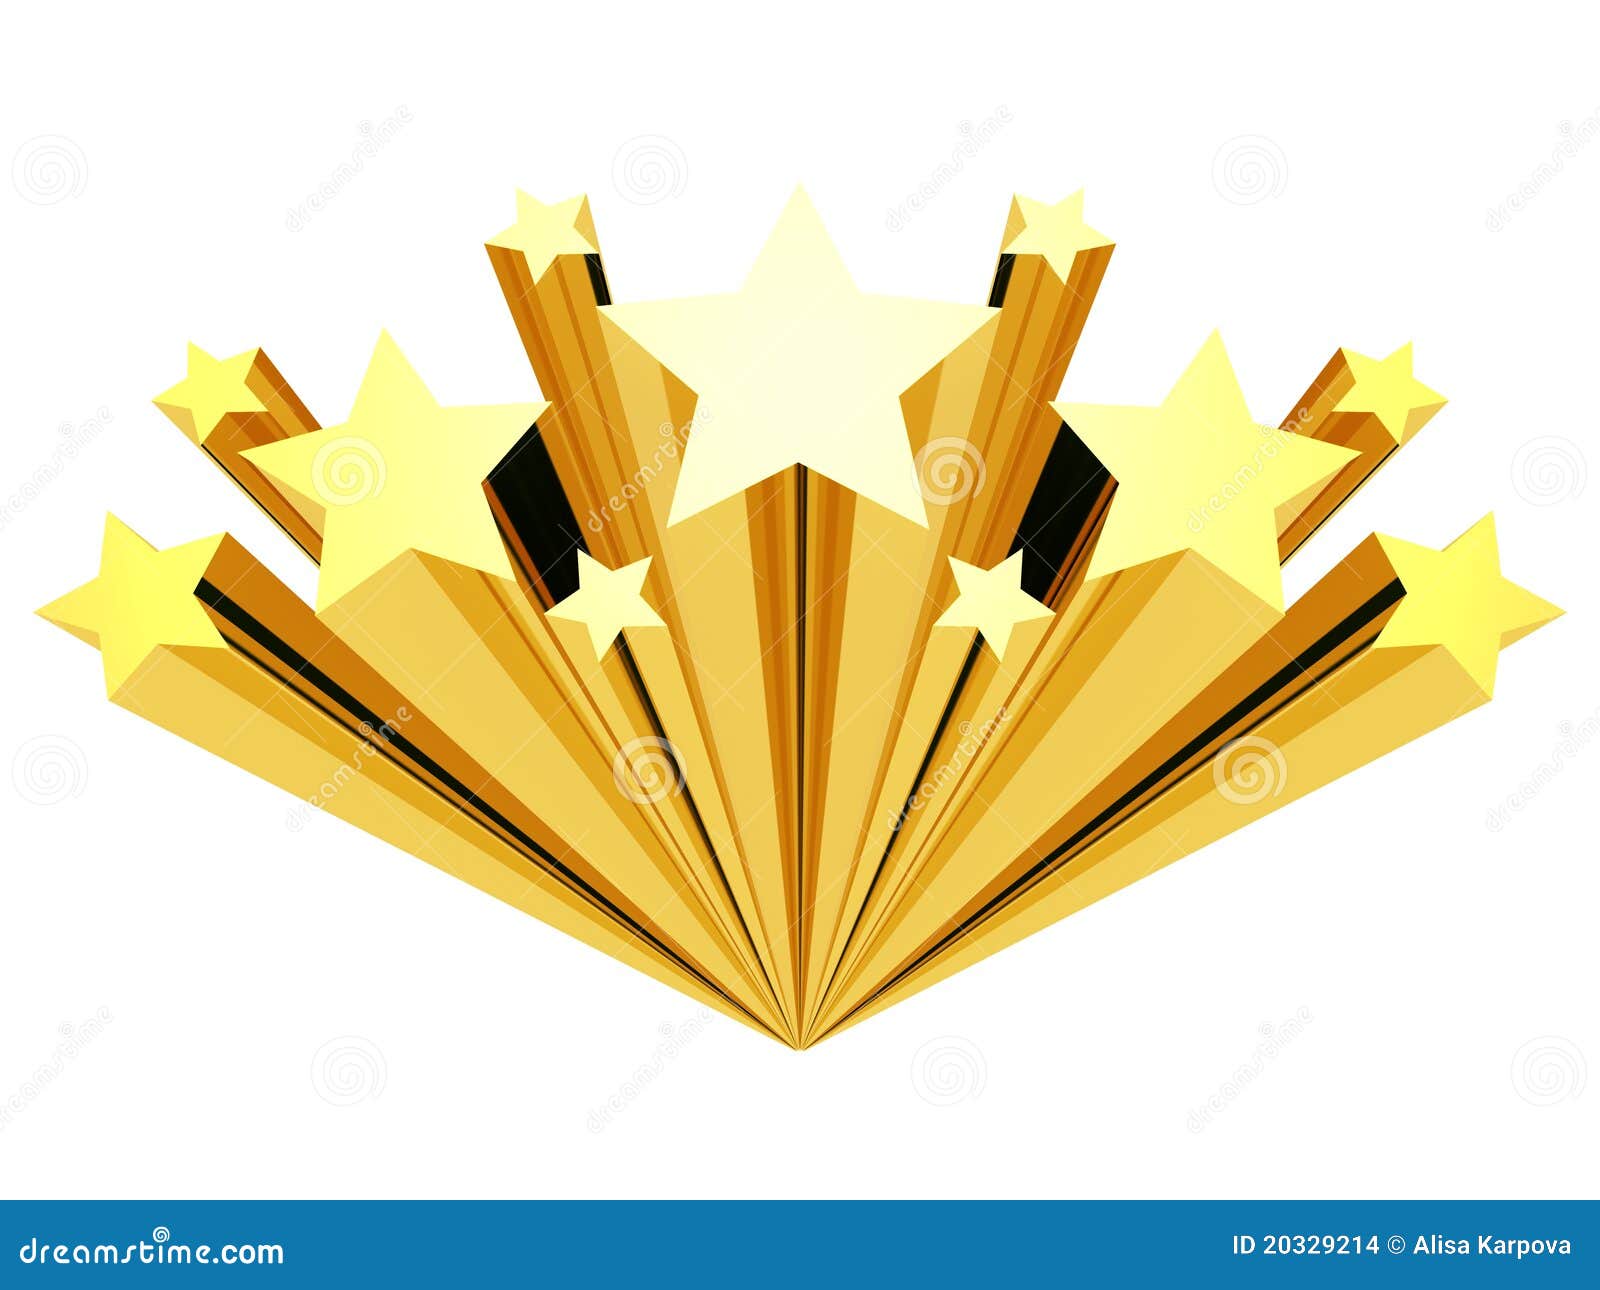 Gold star clip art isolated on a white